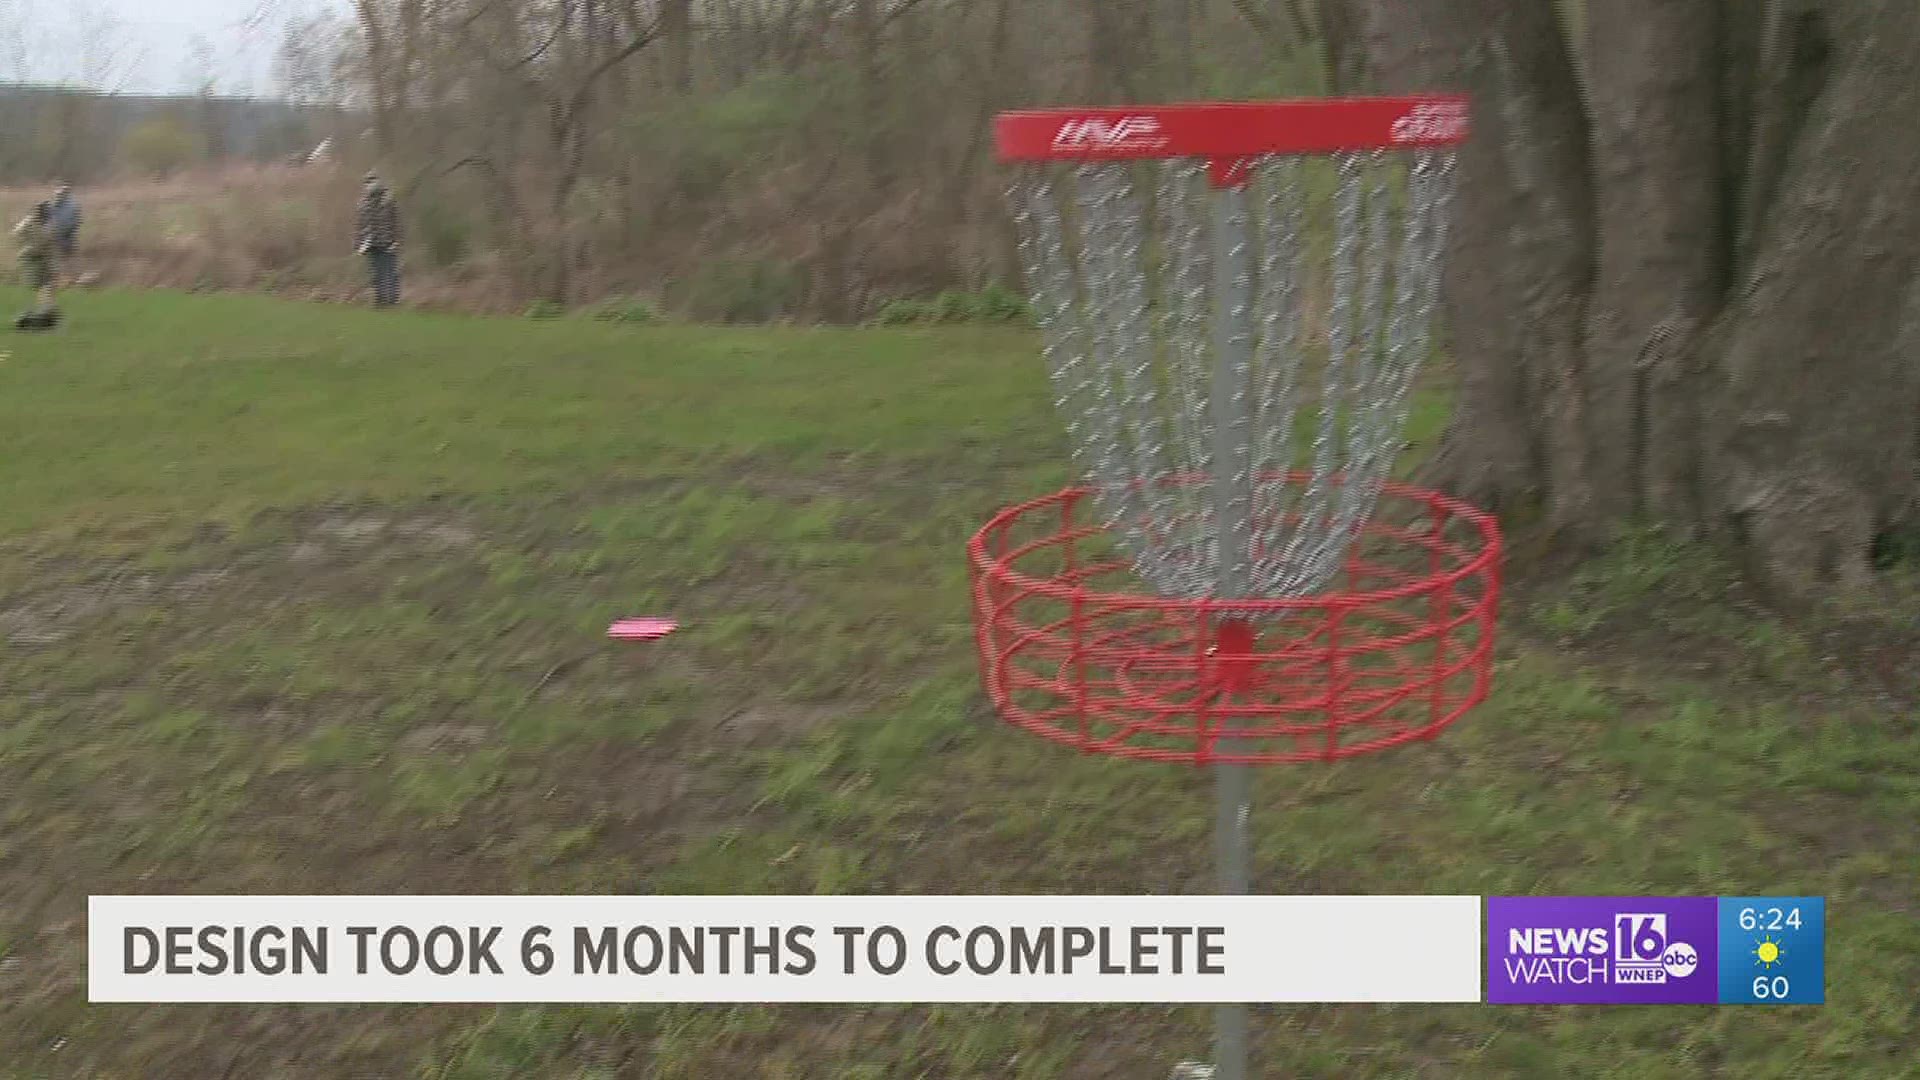 Tunkhannock Disc Golf supporting the memory of Billy Kresge